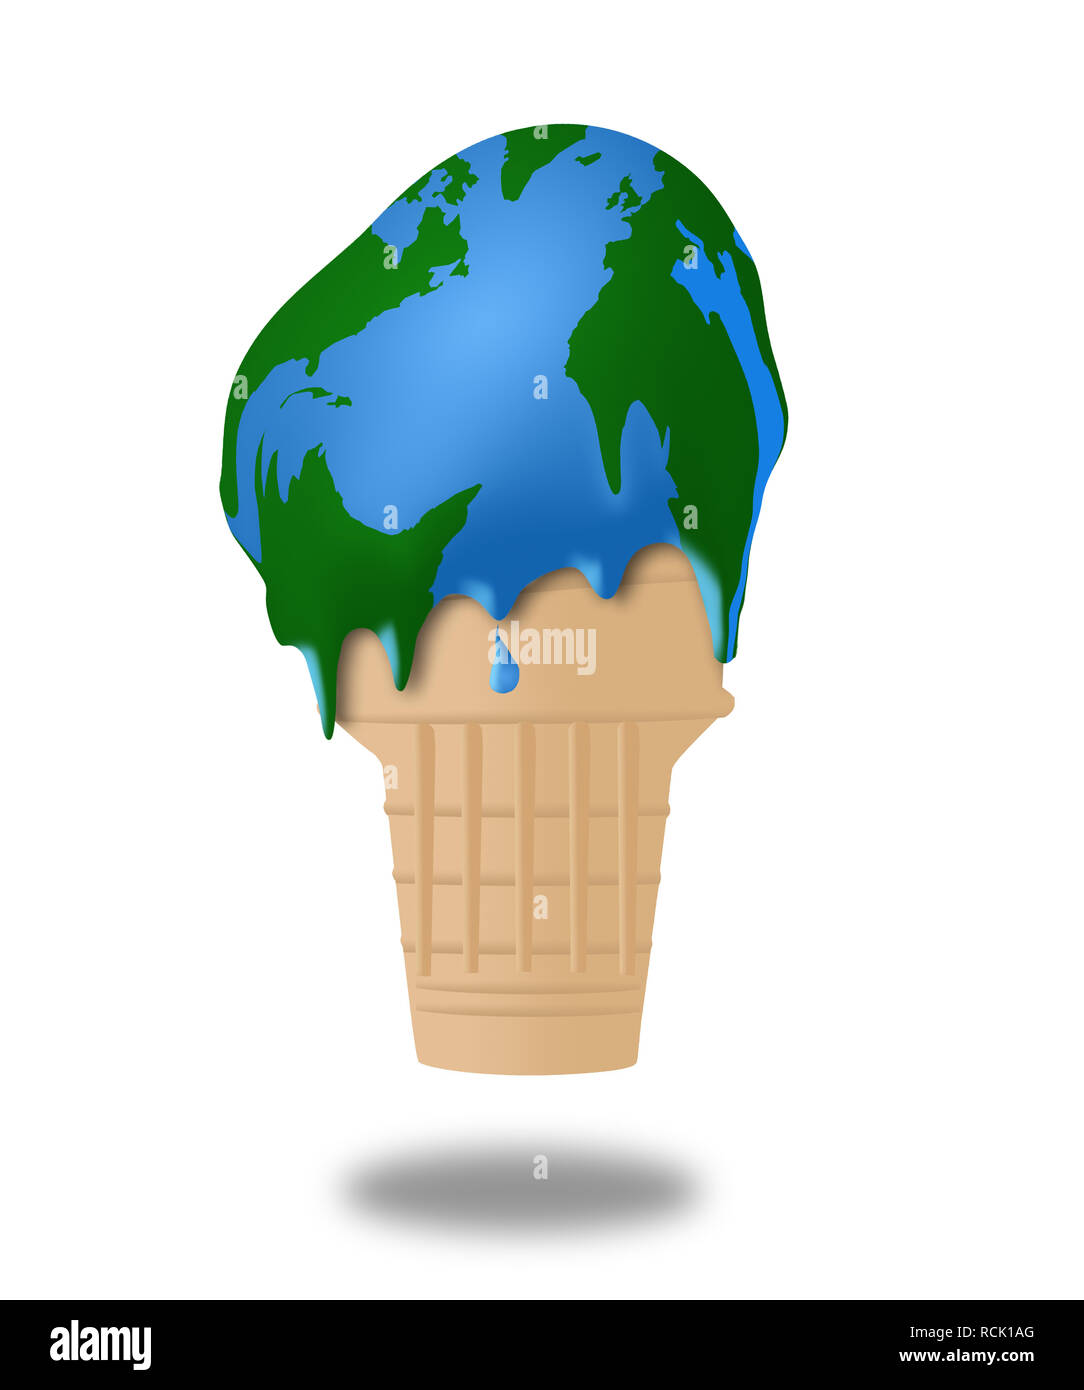 Global warming is illustrated with a melting ice cream cone and the ice cream appears to also be a globe map of earth. This is an illustration. Stock Photo